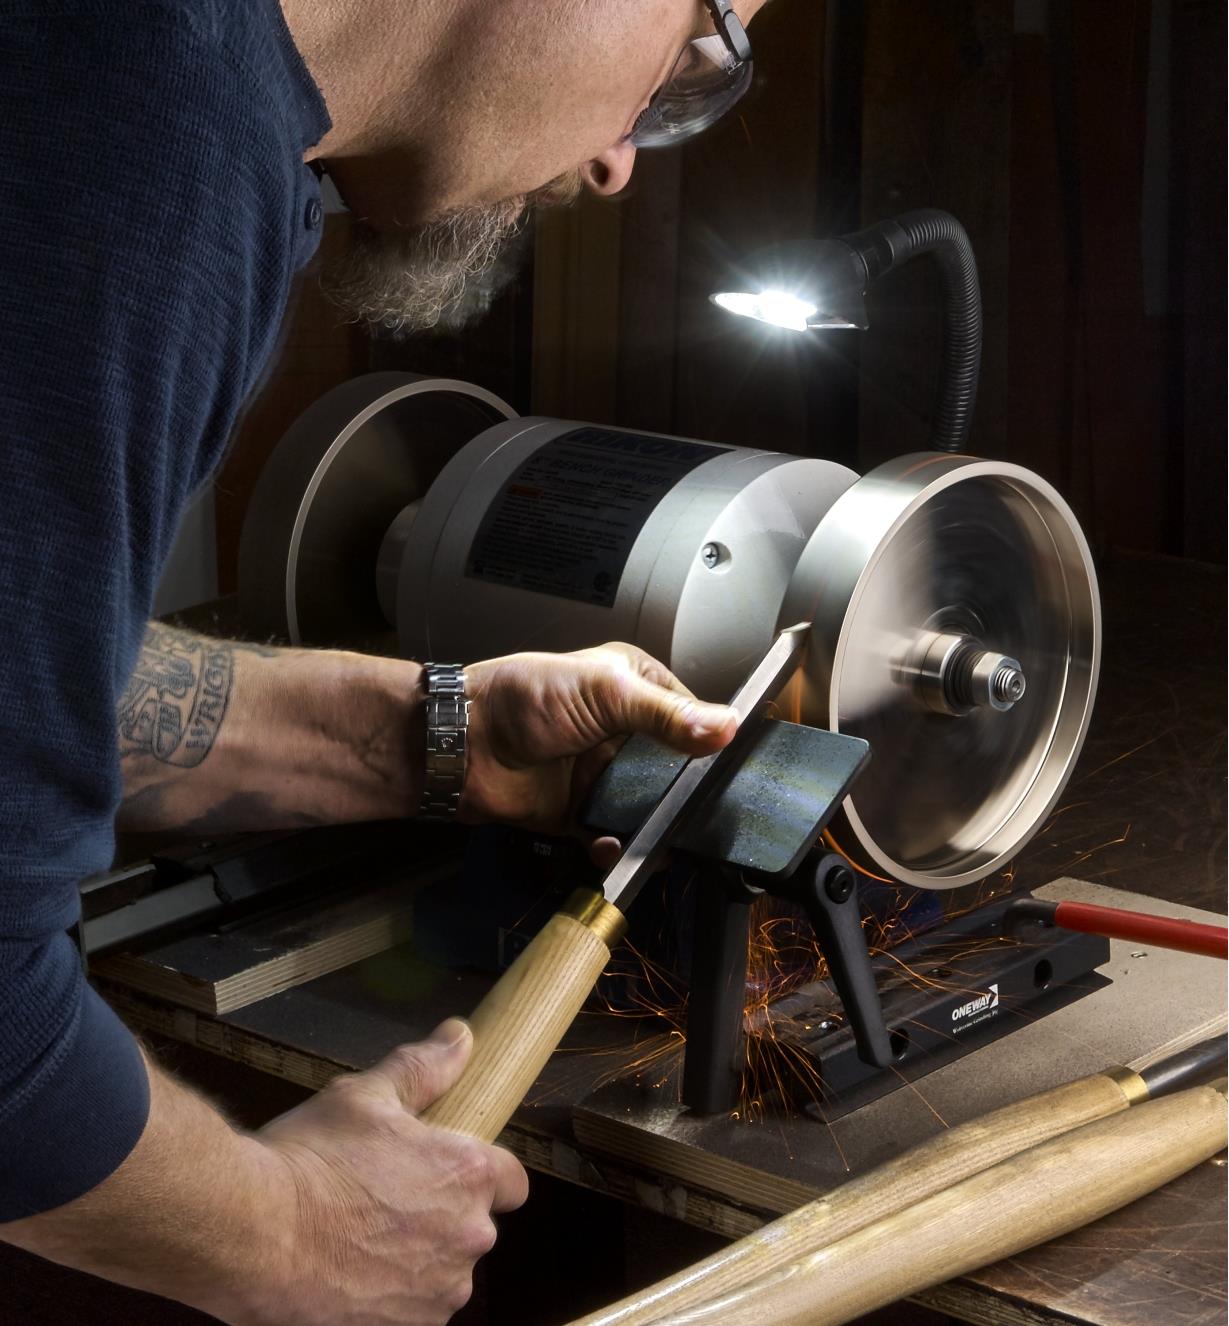 Using a CBN wheel on a low-speed grinder to sharpen a turning tool